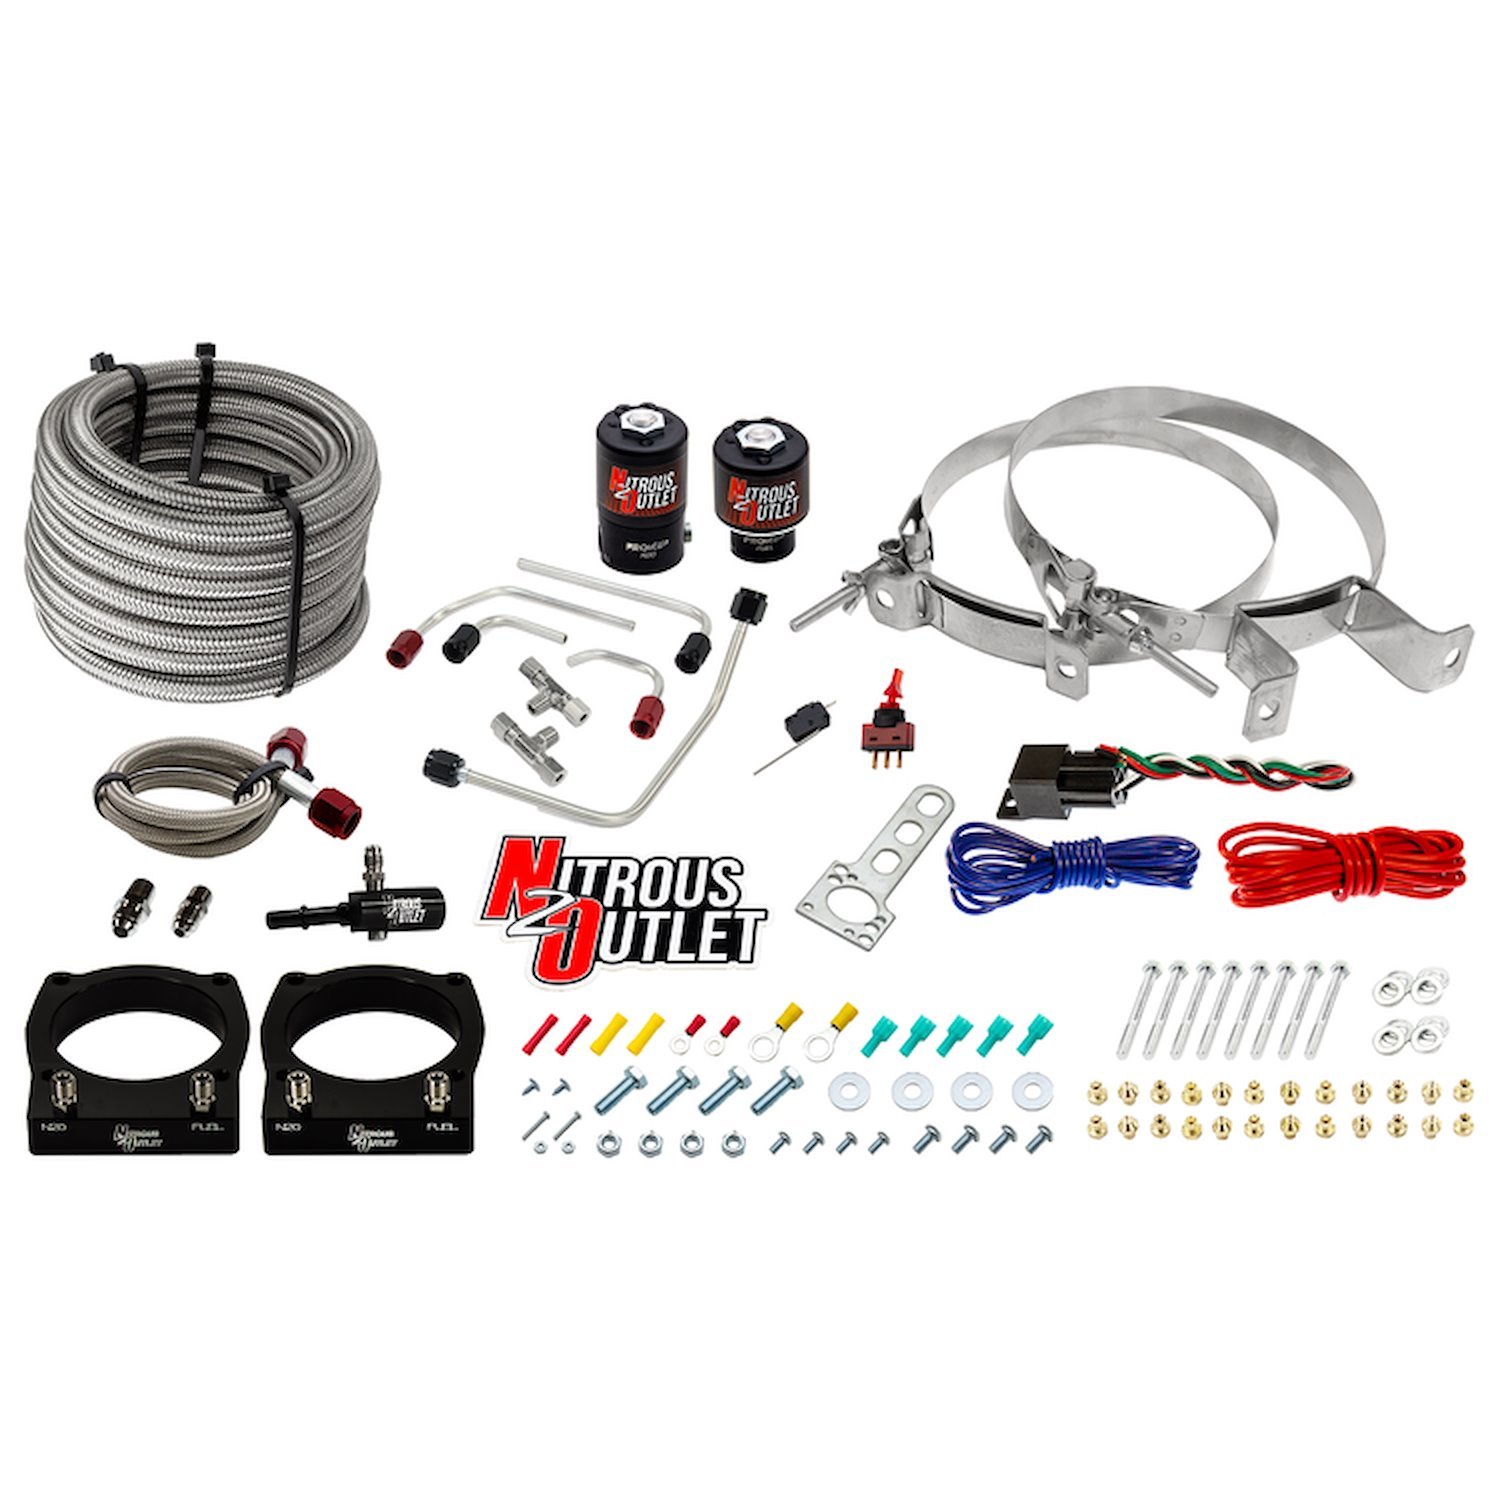 00-10155-00 Dodge 2008-2017 Viper Hard-Lined Plate System, Gas/E85, 5-55psi, 70-200HP, No Bottle